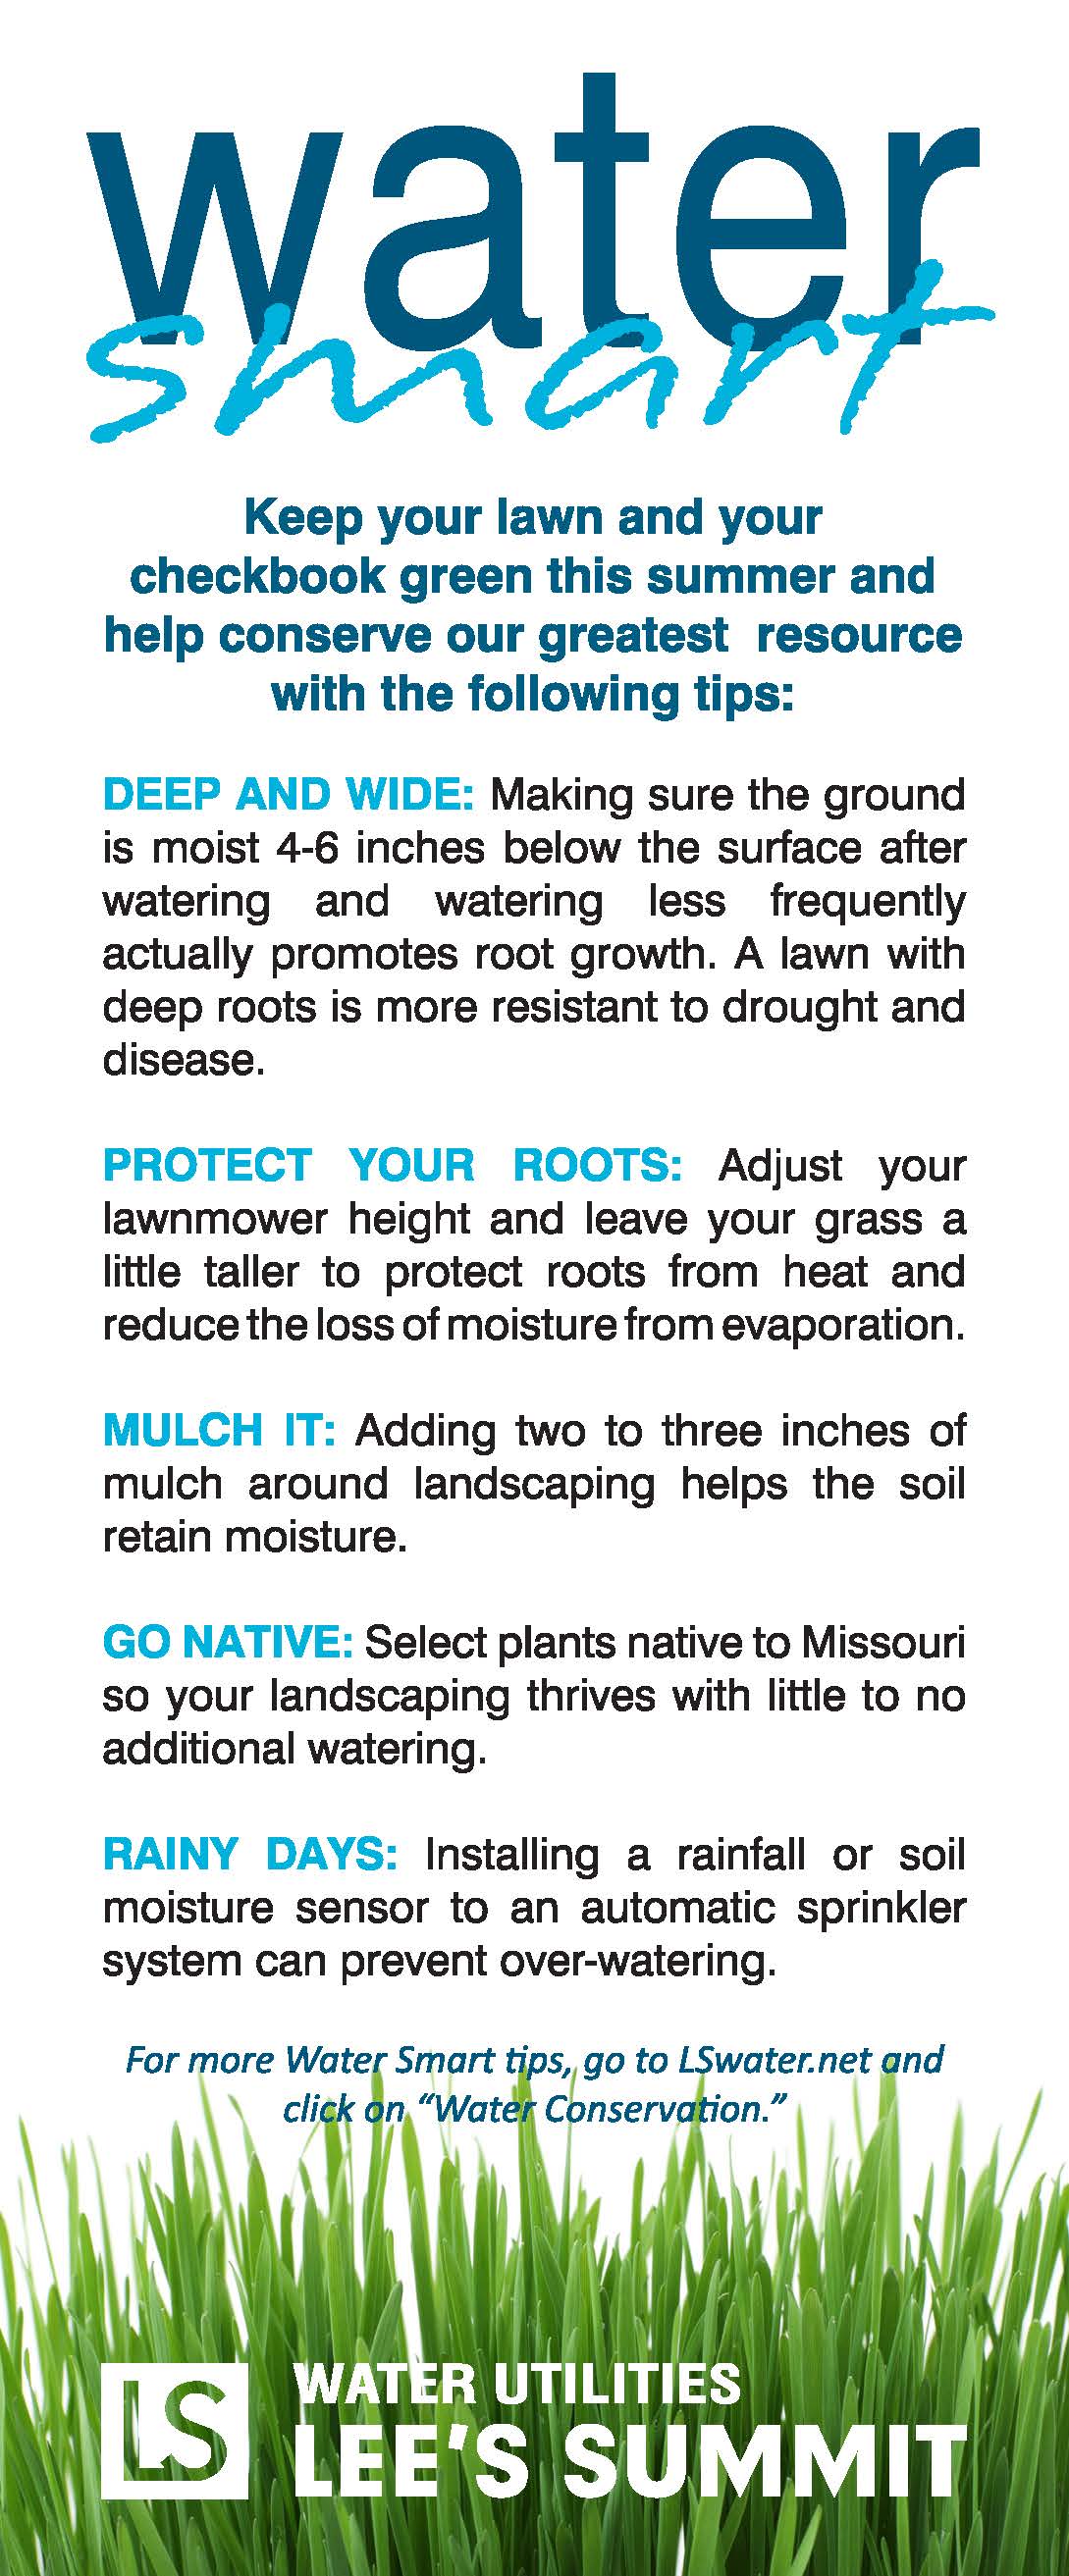 "Water Smart" flyer that lists ways to save water in lawn care.  